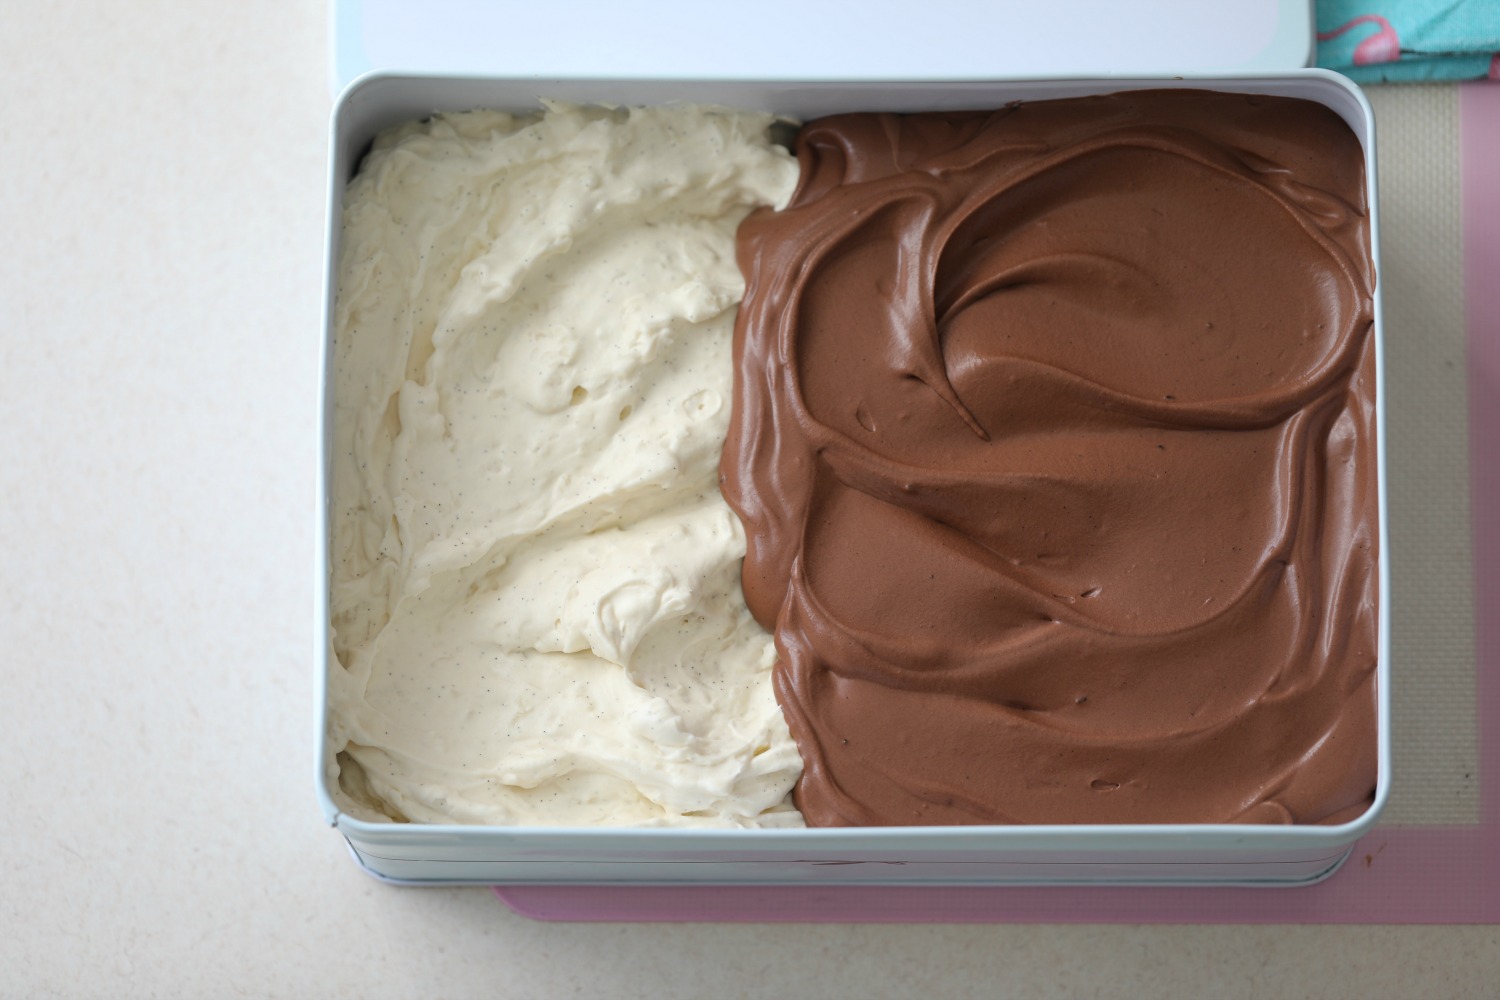 BOUNTY ICE CREAM - Passion For Baking :::GET INSPIRED:::